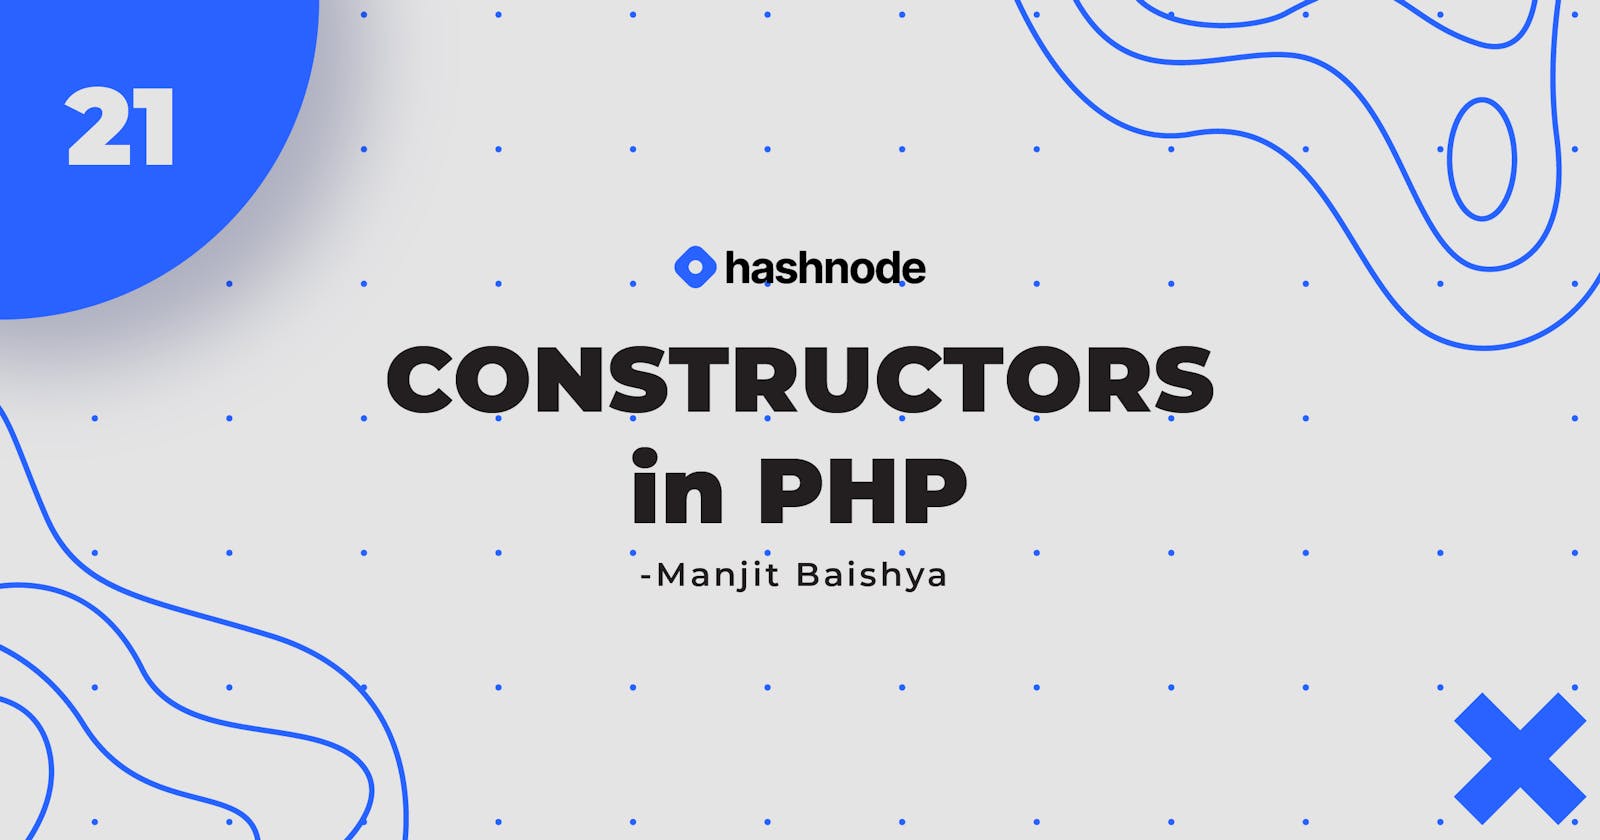 Day 21: CONSTRUCTORS in PHP